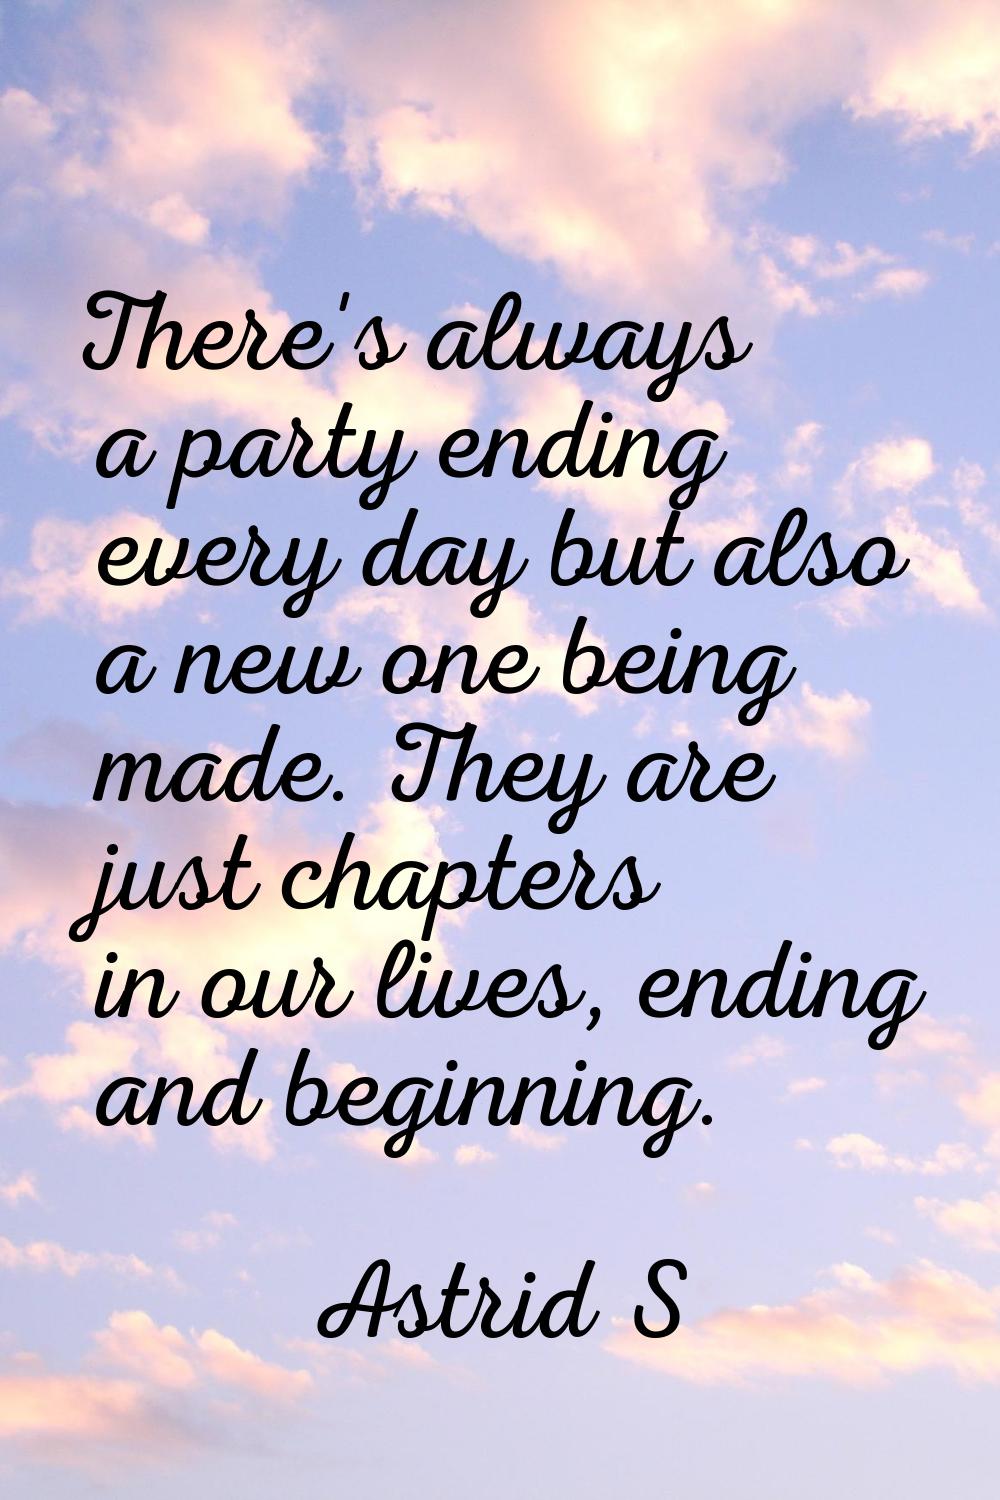 There's always a party ending every day but also a new one being made. They are just chapters in ou